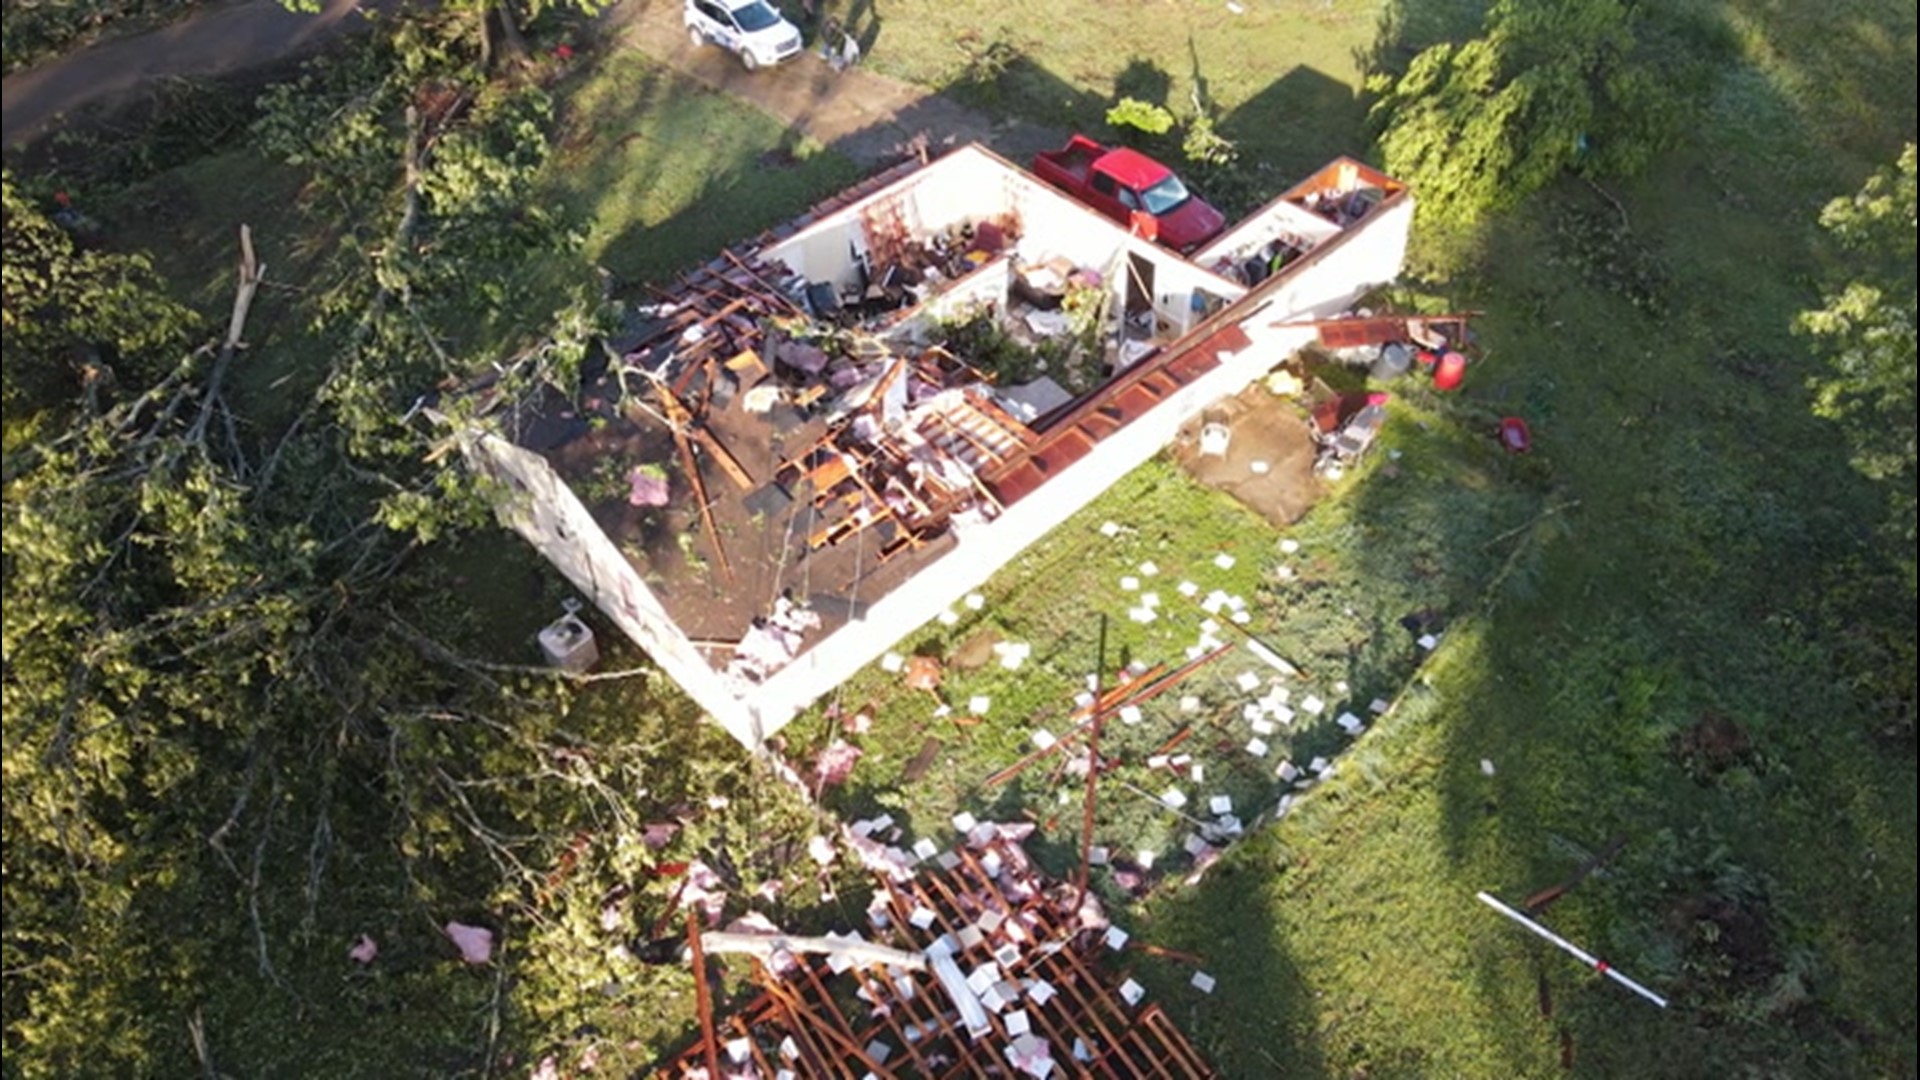 Families in North Louisiana are rushing to clean up and repair damaged roofs from a tornado on April 7, before a second round of severe weather moves in.